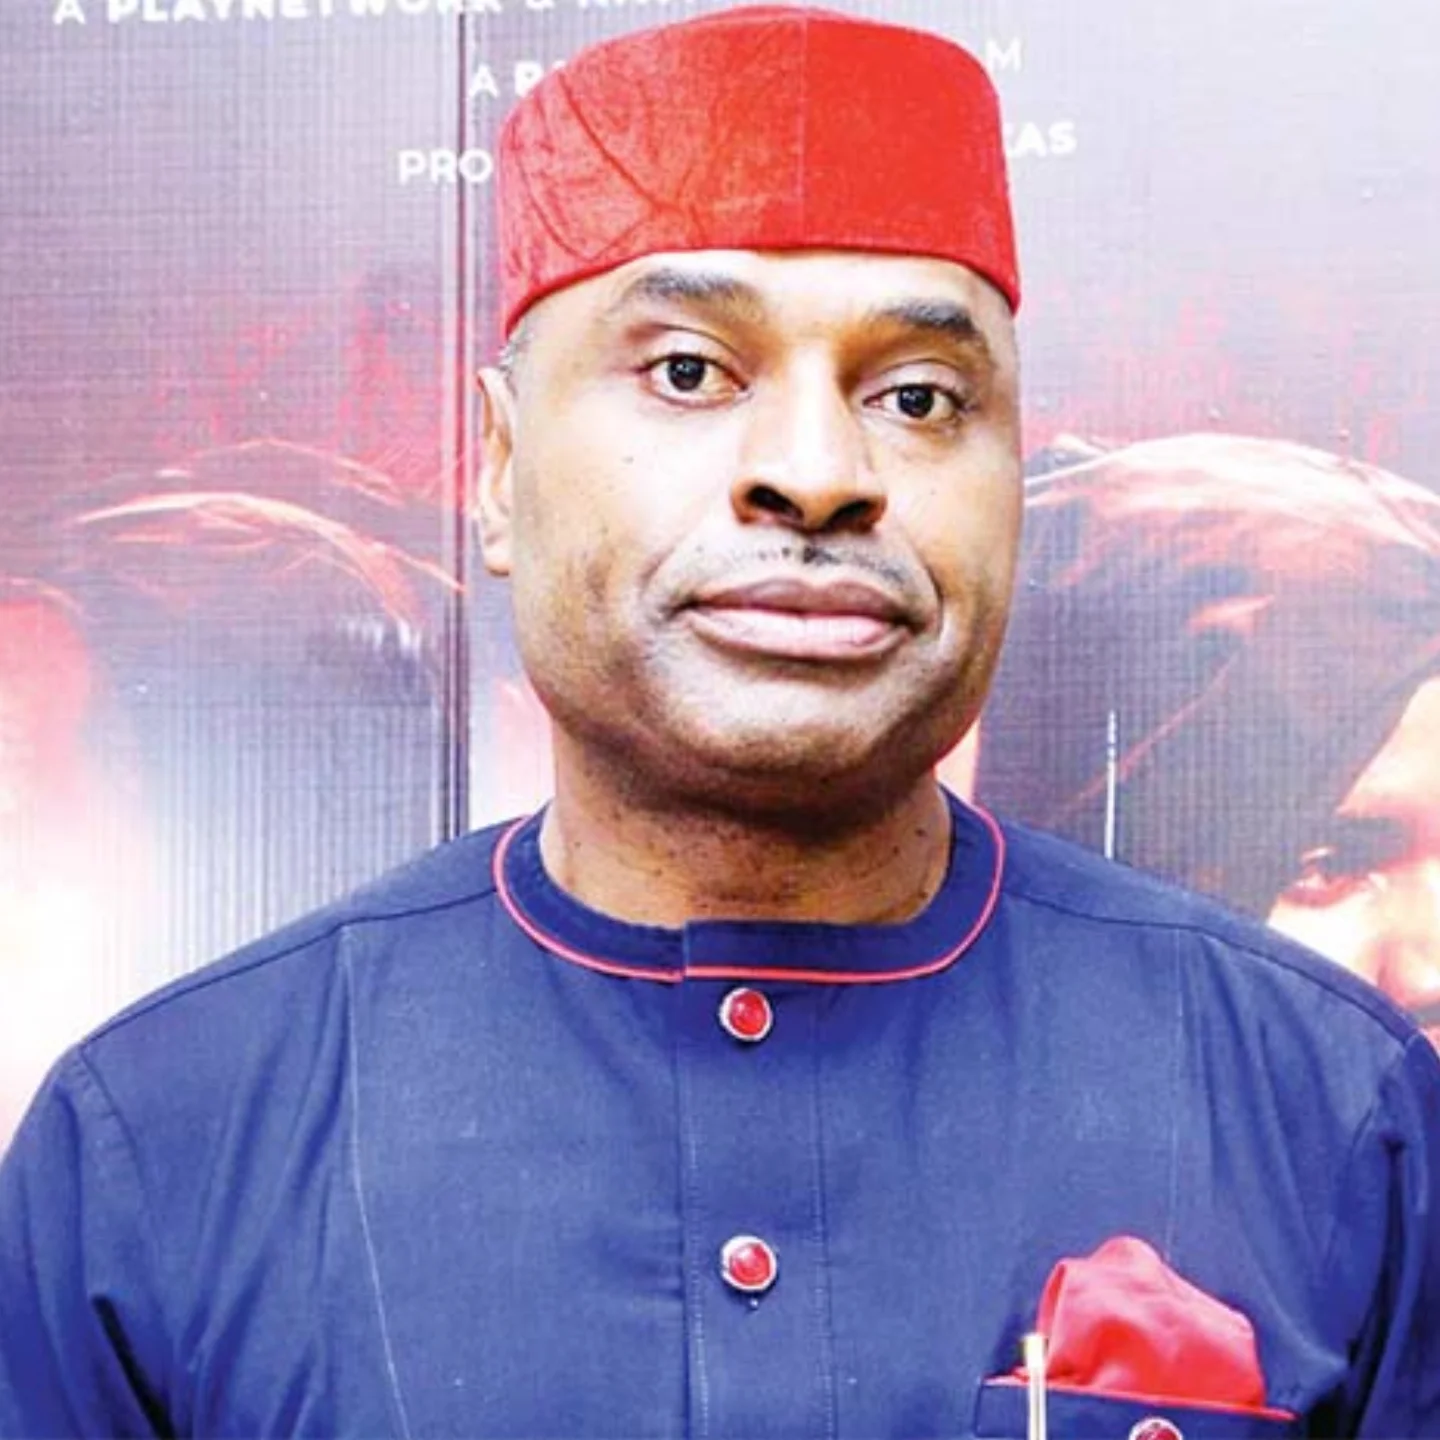 LP crisis: Stay away from Abure-led NWC, they will scam you – Kenneth Okonkwo warns Nigerians